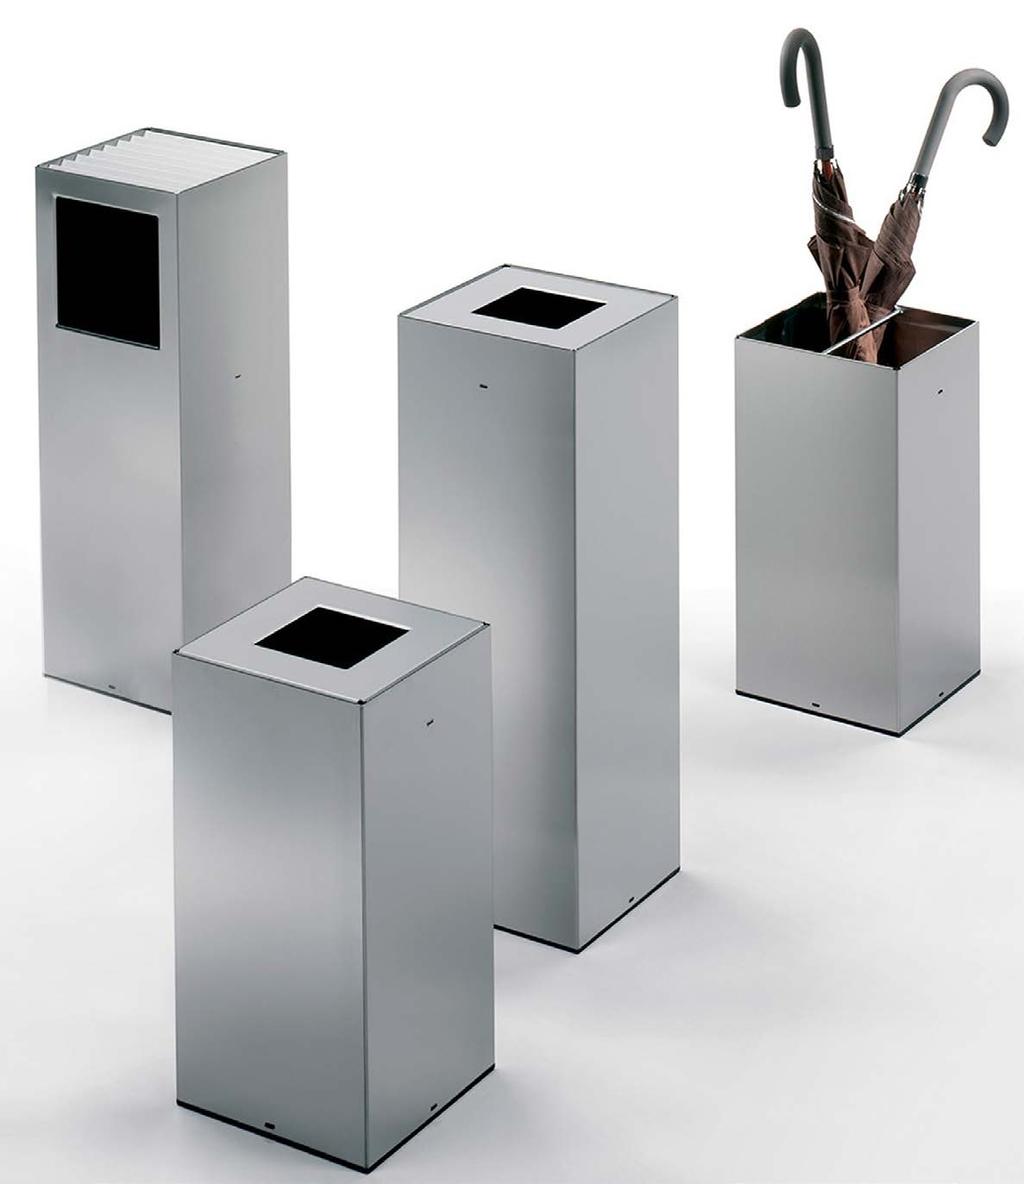 49 25 25 71 31 73 35 76 ENG Collection of simple and functional waste bins, suitable for public transit, lobby and for the office. Manufactured of stainless steel frame or steel and painted lid.